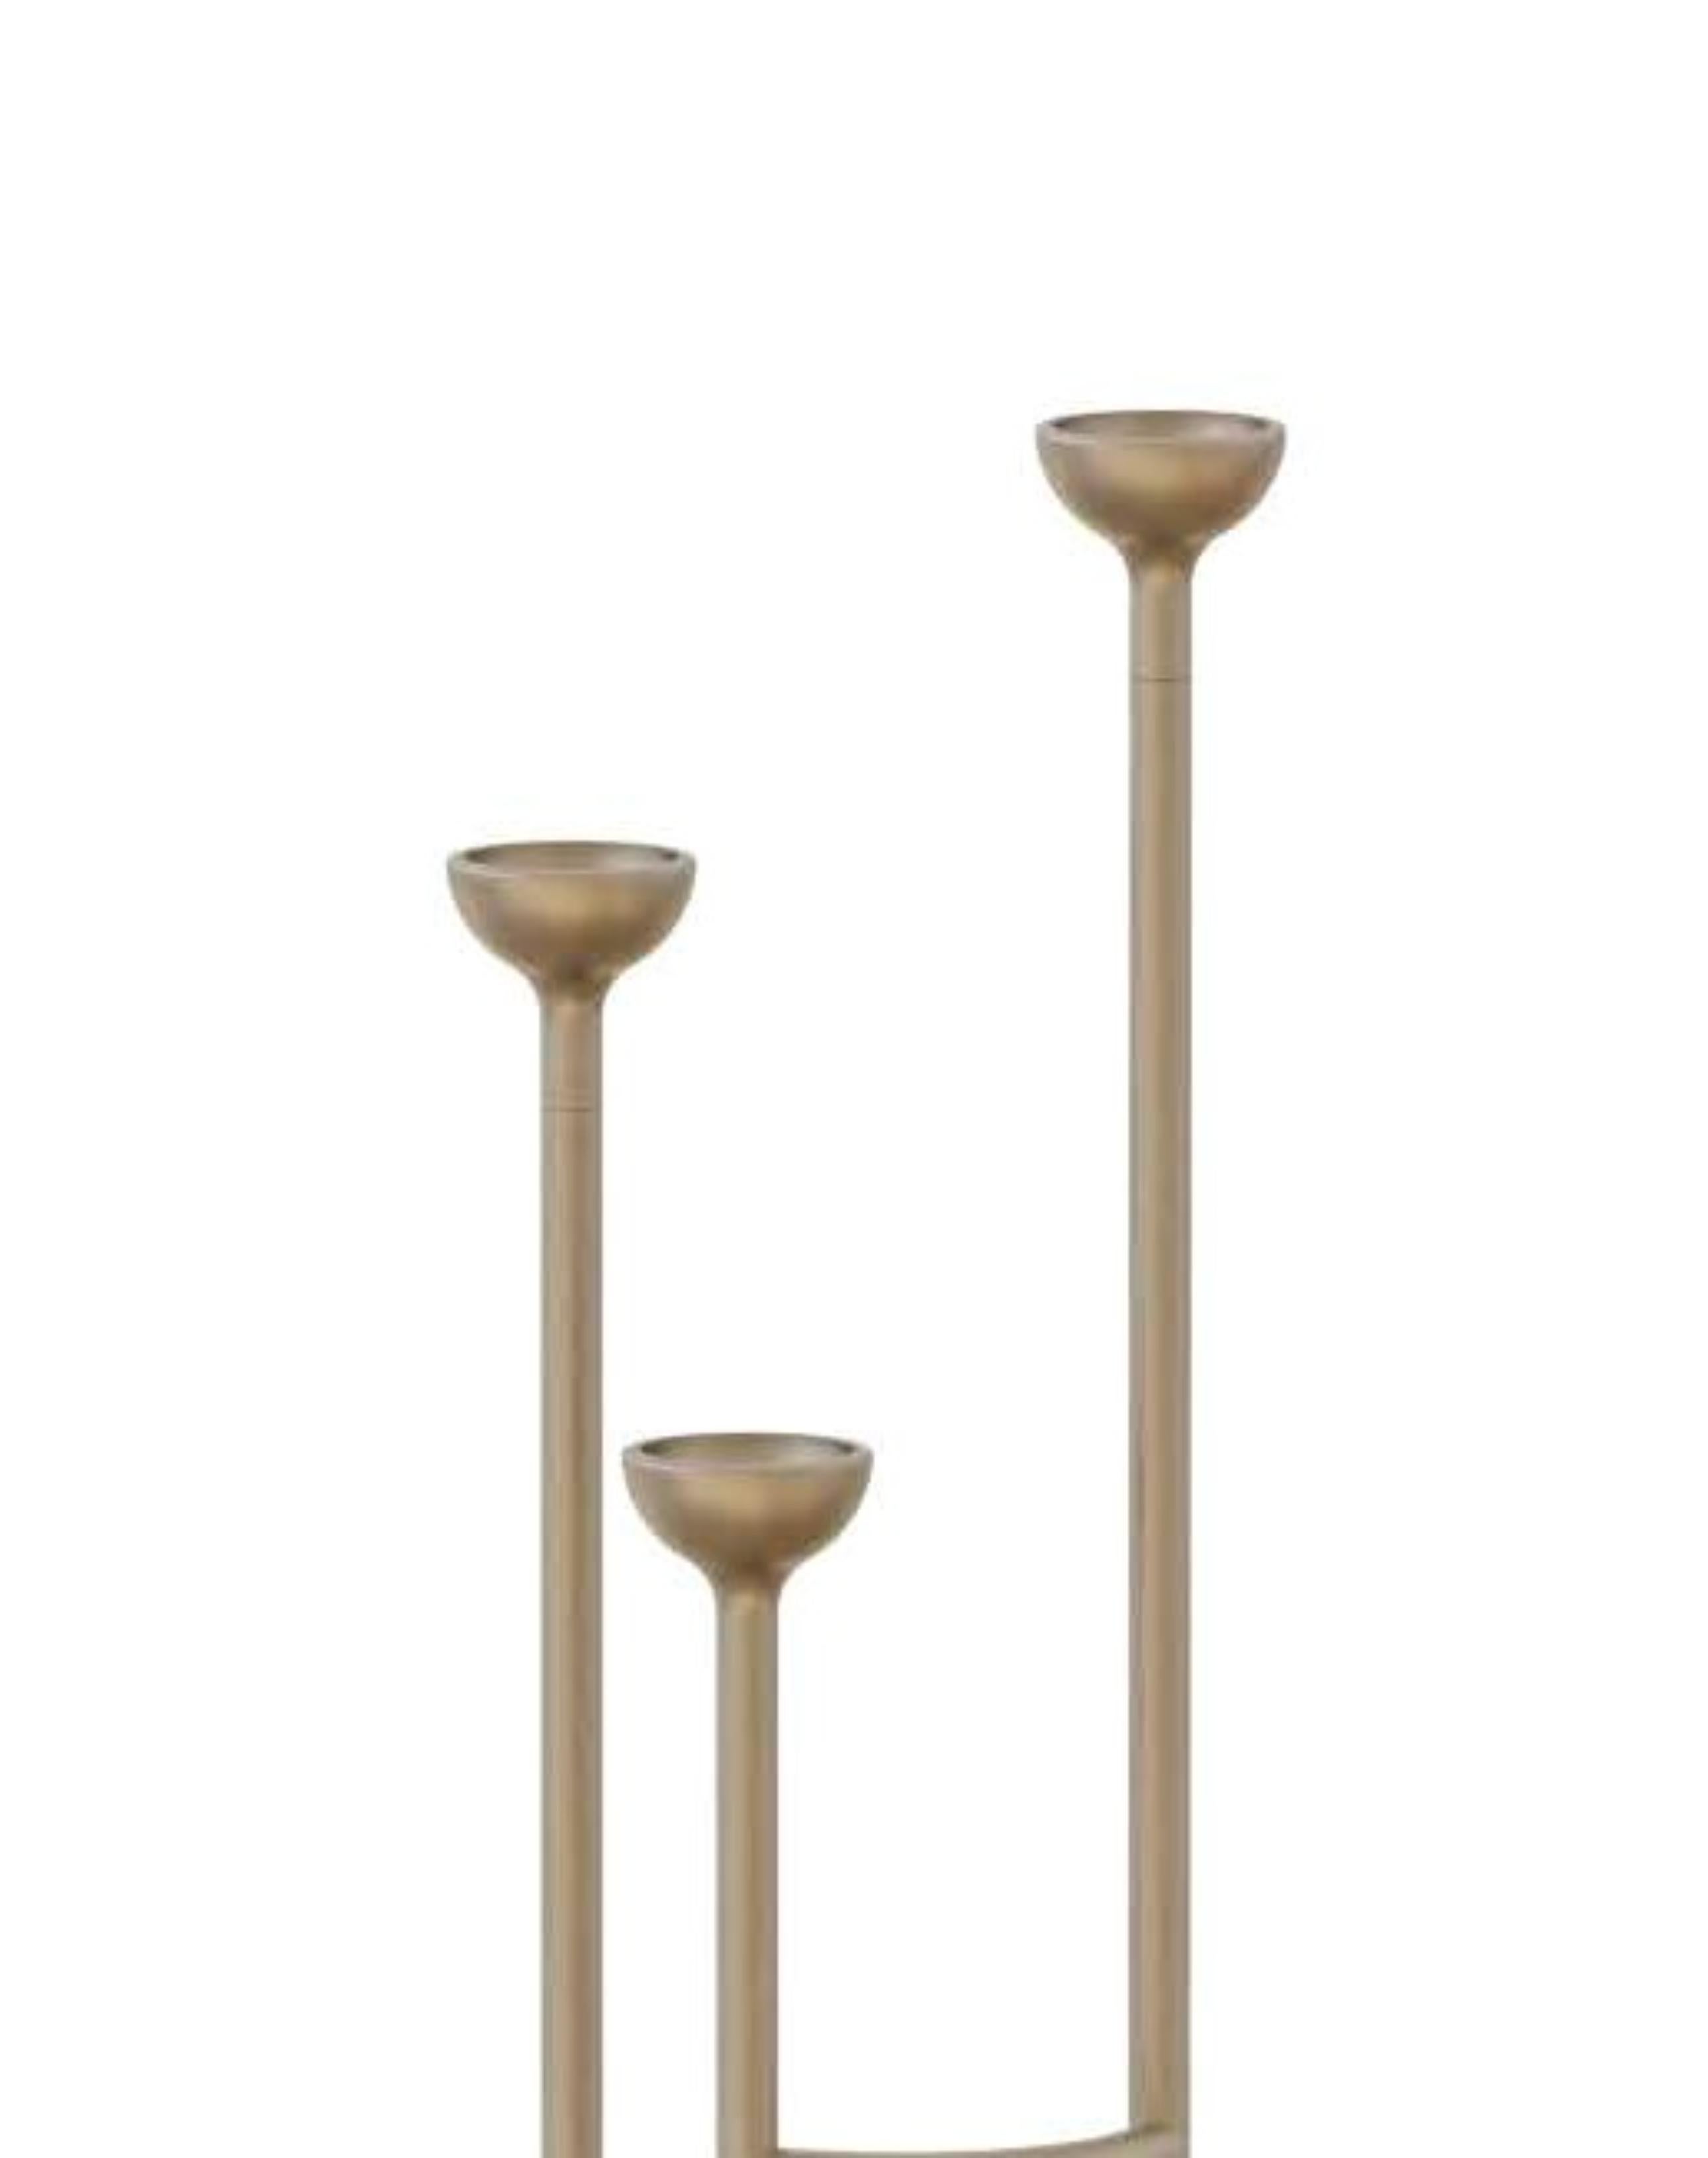 Camino candle holder by Sebastián Angeles
Material: brass
Dimensions: W 20 x D 20 x H 65 cm
Also available: steel version available.

The transcendence of decisionmaking and its consequences, as turning points in everyday life, are concepts